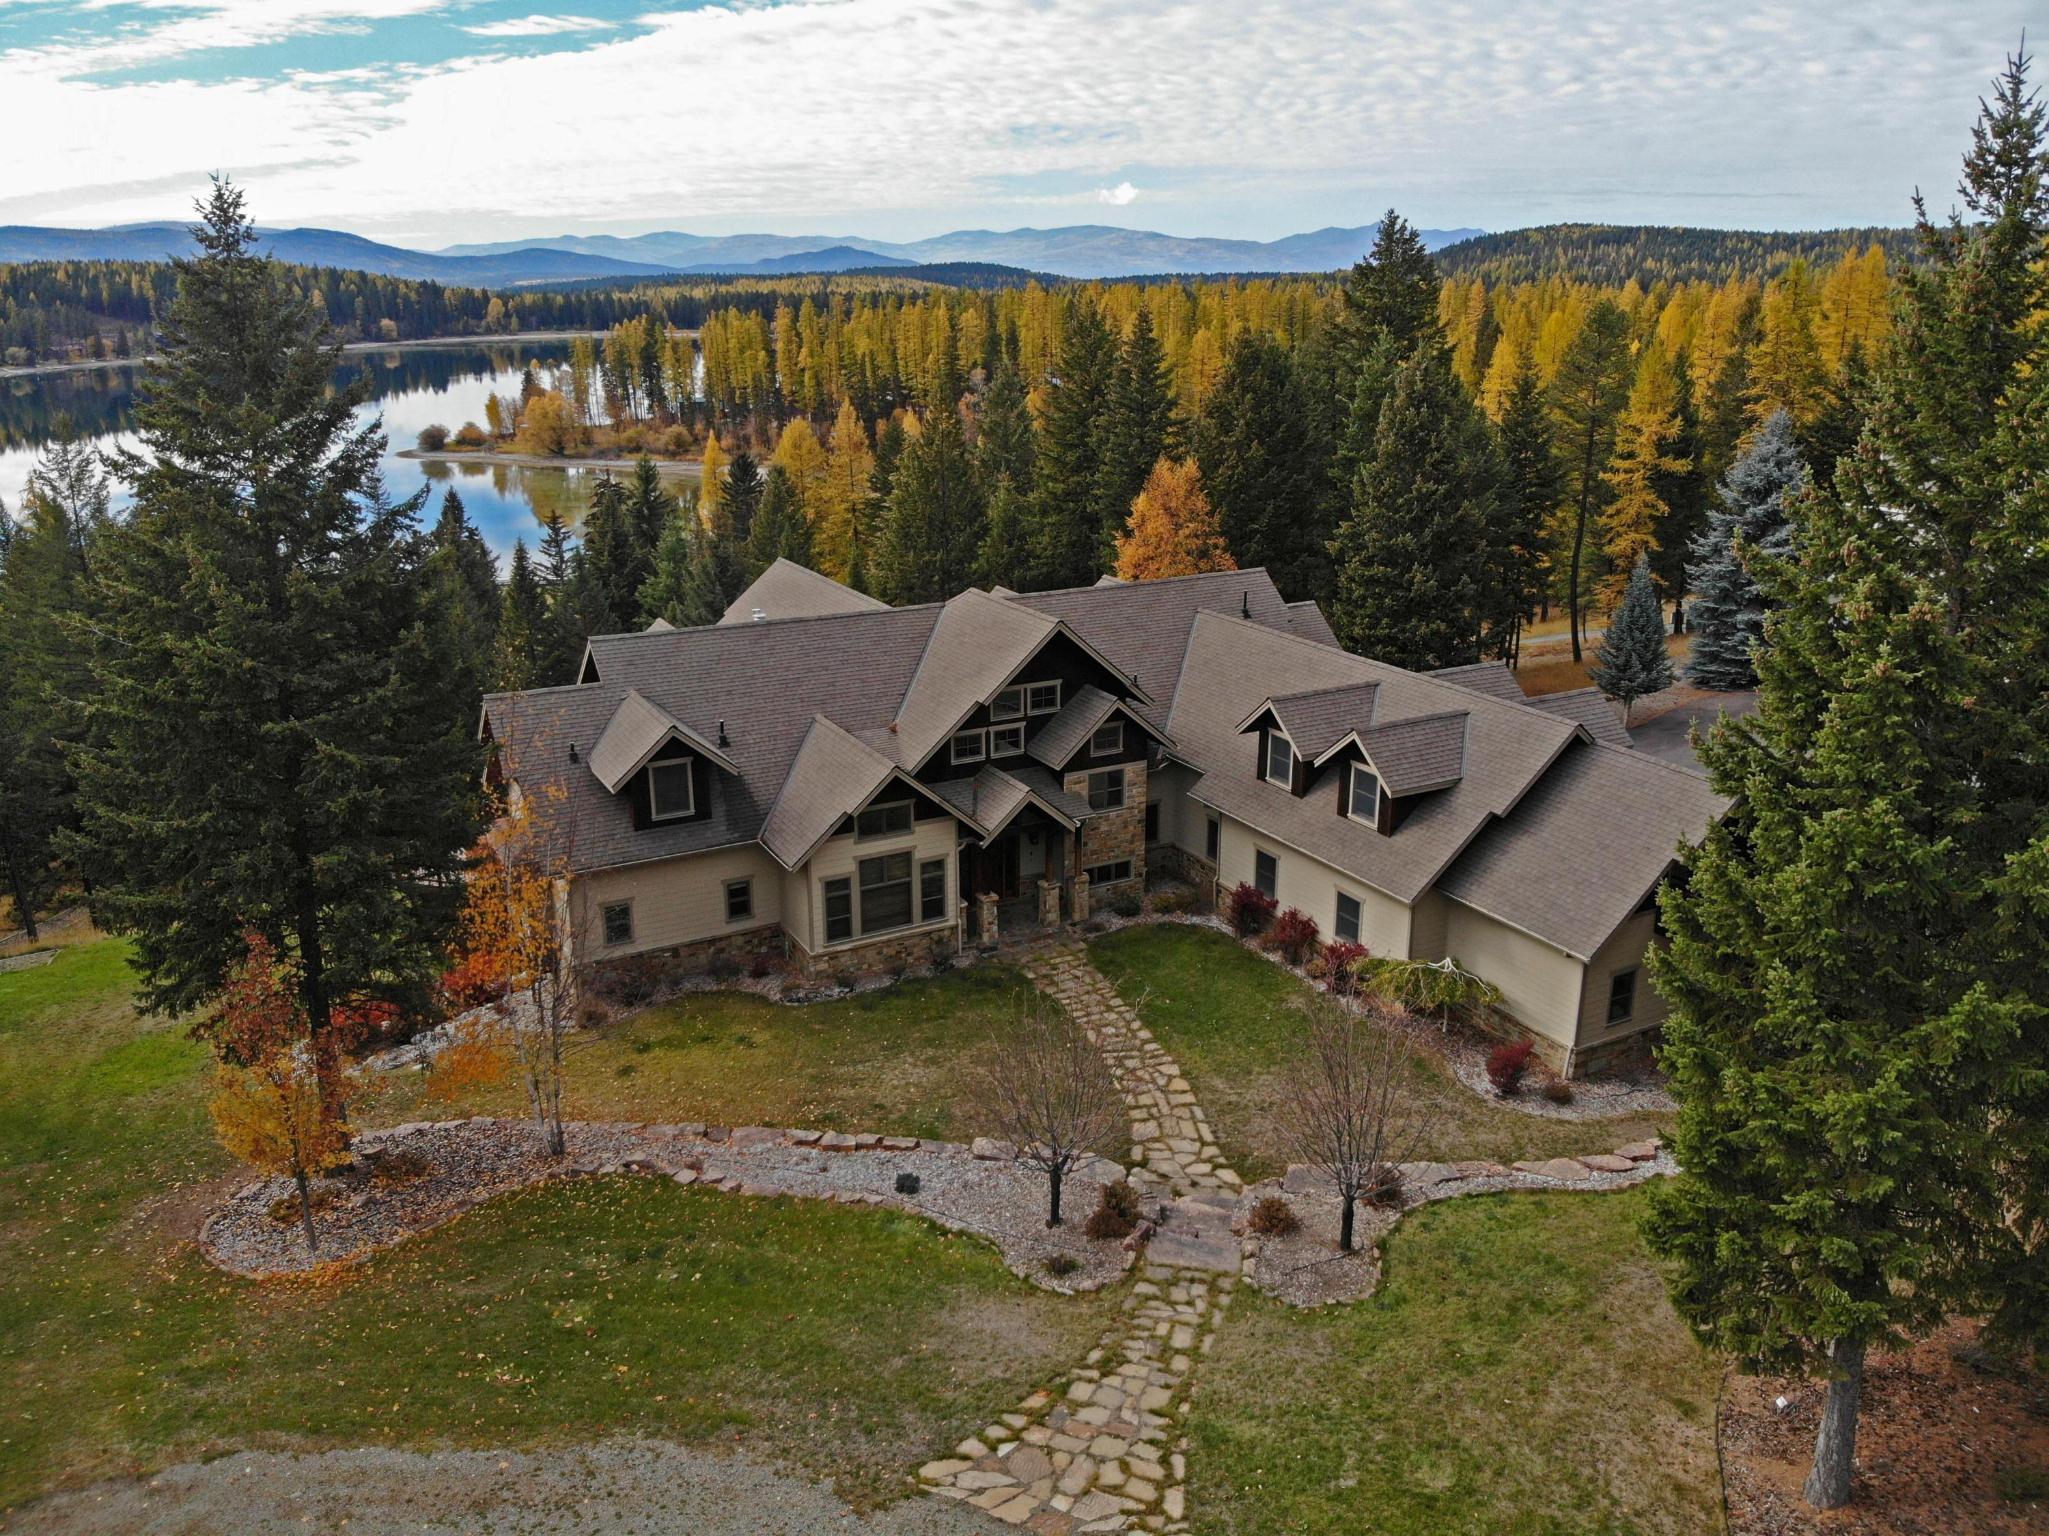 Leave the world behind at this lakefront estate perched on the rolling hills of Glen Lake. The serene setting of mature trees, manicured lawns and expansive decks is the perfect backdrop for a private Montana getaway. Situated at the center of 11 acres maximizing natural light and lake views, this home is a rare find boasting both lake frontage and complete privacy. Endless recreation awaits just minutes from Montana's #1 golf course and 45 min. from 2 world class ski resorts. The lakefront lot boasts over 200' of water front complete with docks and boat slips. Amenities include a theater room, commercial kitchen, spacious toy barn with guest suite and RV parking. See feature sheet for full details. Call Gretchen Lancaster 406-291-7099 or your real estate professional This home boasts a long list of amenities. The crowning features include; 1000+ sqft state of the art theater room with 13 stadium seats, 2592 sqft shop/boat storage with 850 sqft (1 bed, 2 bath finished guest quarters.) and a total of 6 car parking including the 3 car attached garage. 2 Master suites (one main level, one upstairs), a commercial grade kitchen, granite counter tops, large walk in pantry, bonus hockey play room, red oak floors throughout, coffered ceilings, 2 rock (gas) fireplaces, 3 laundry rooms, office/workout room, library, irrigation system around the home, built in speakers in nearly every room, Vantage lighting system, radiant floor heat, central air, central vacuum, security system, Venmar whole-house air circulation system and a walk in safe.